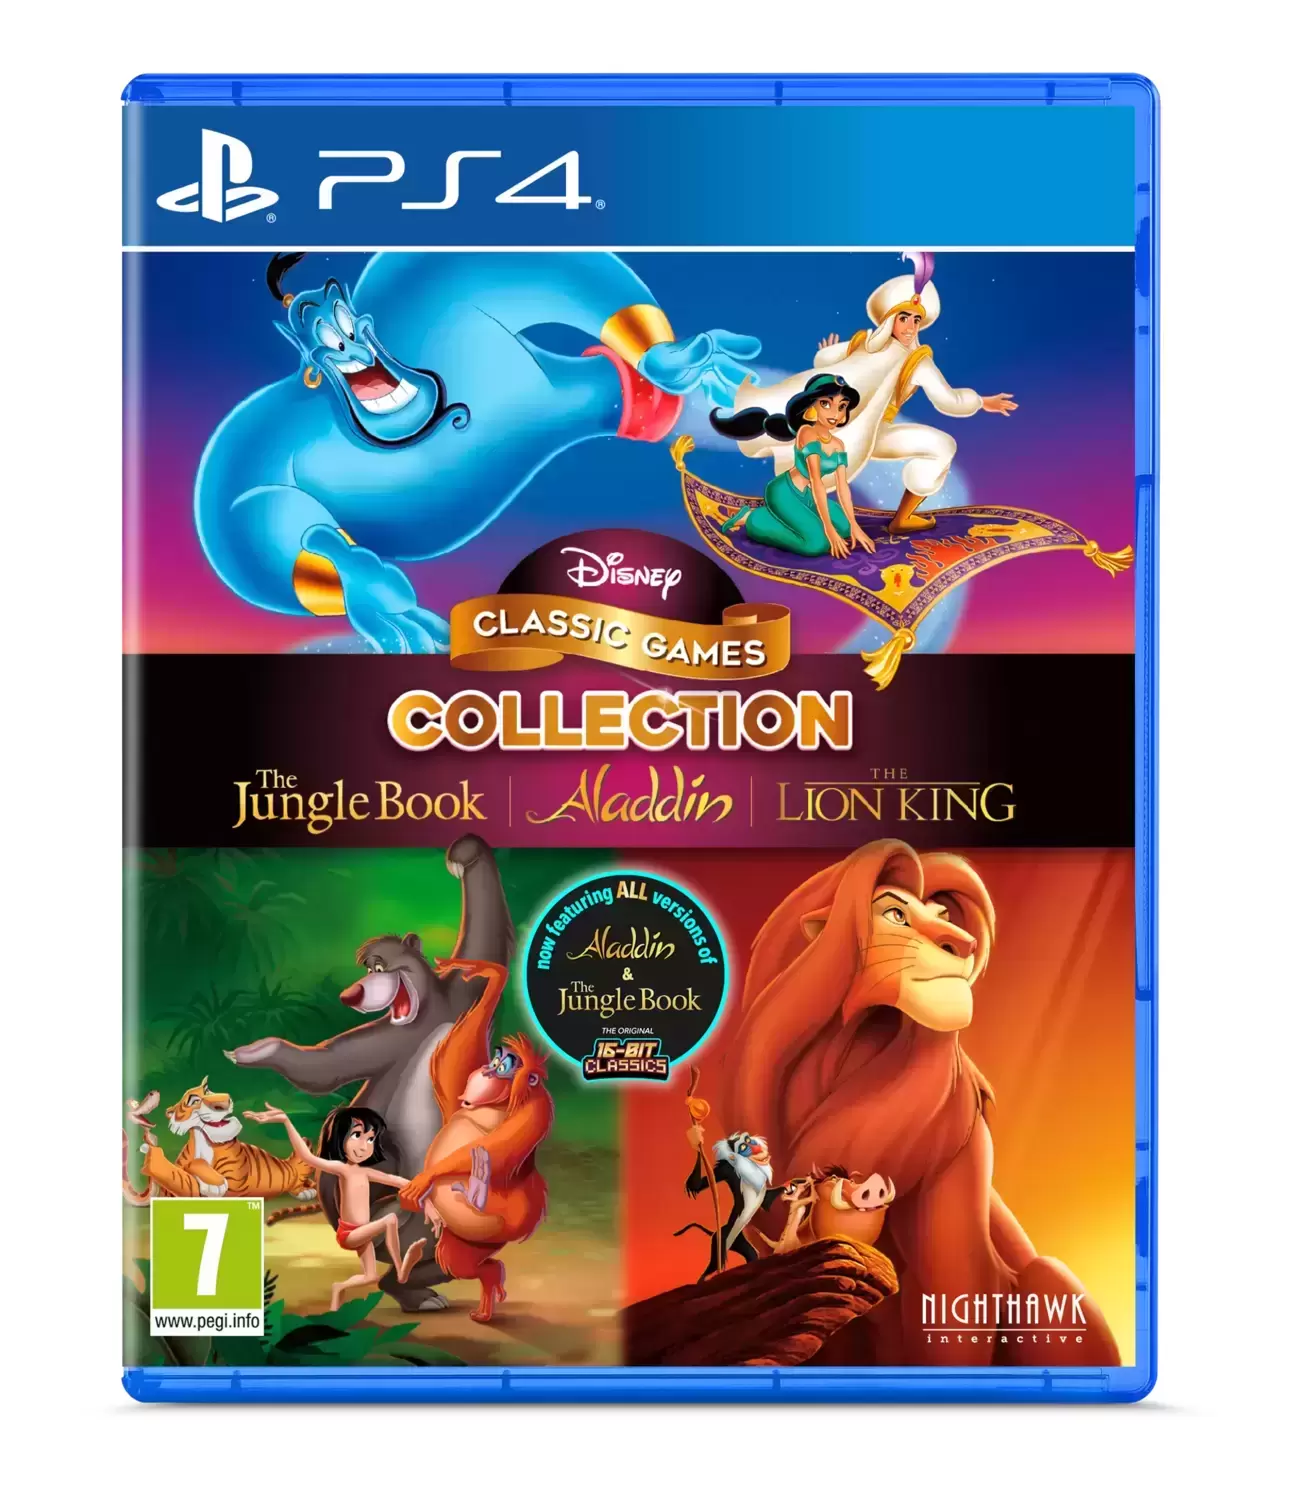 PS4 Games - Disney Classic Games Collection